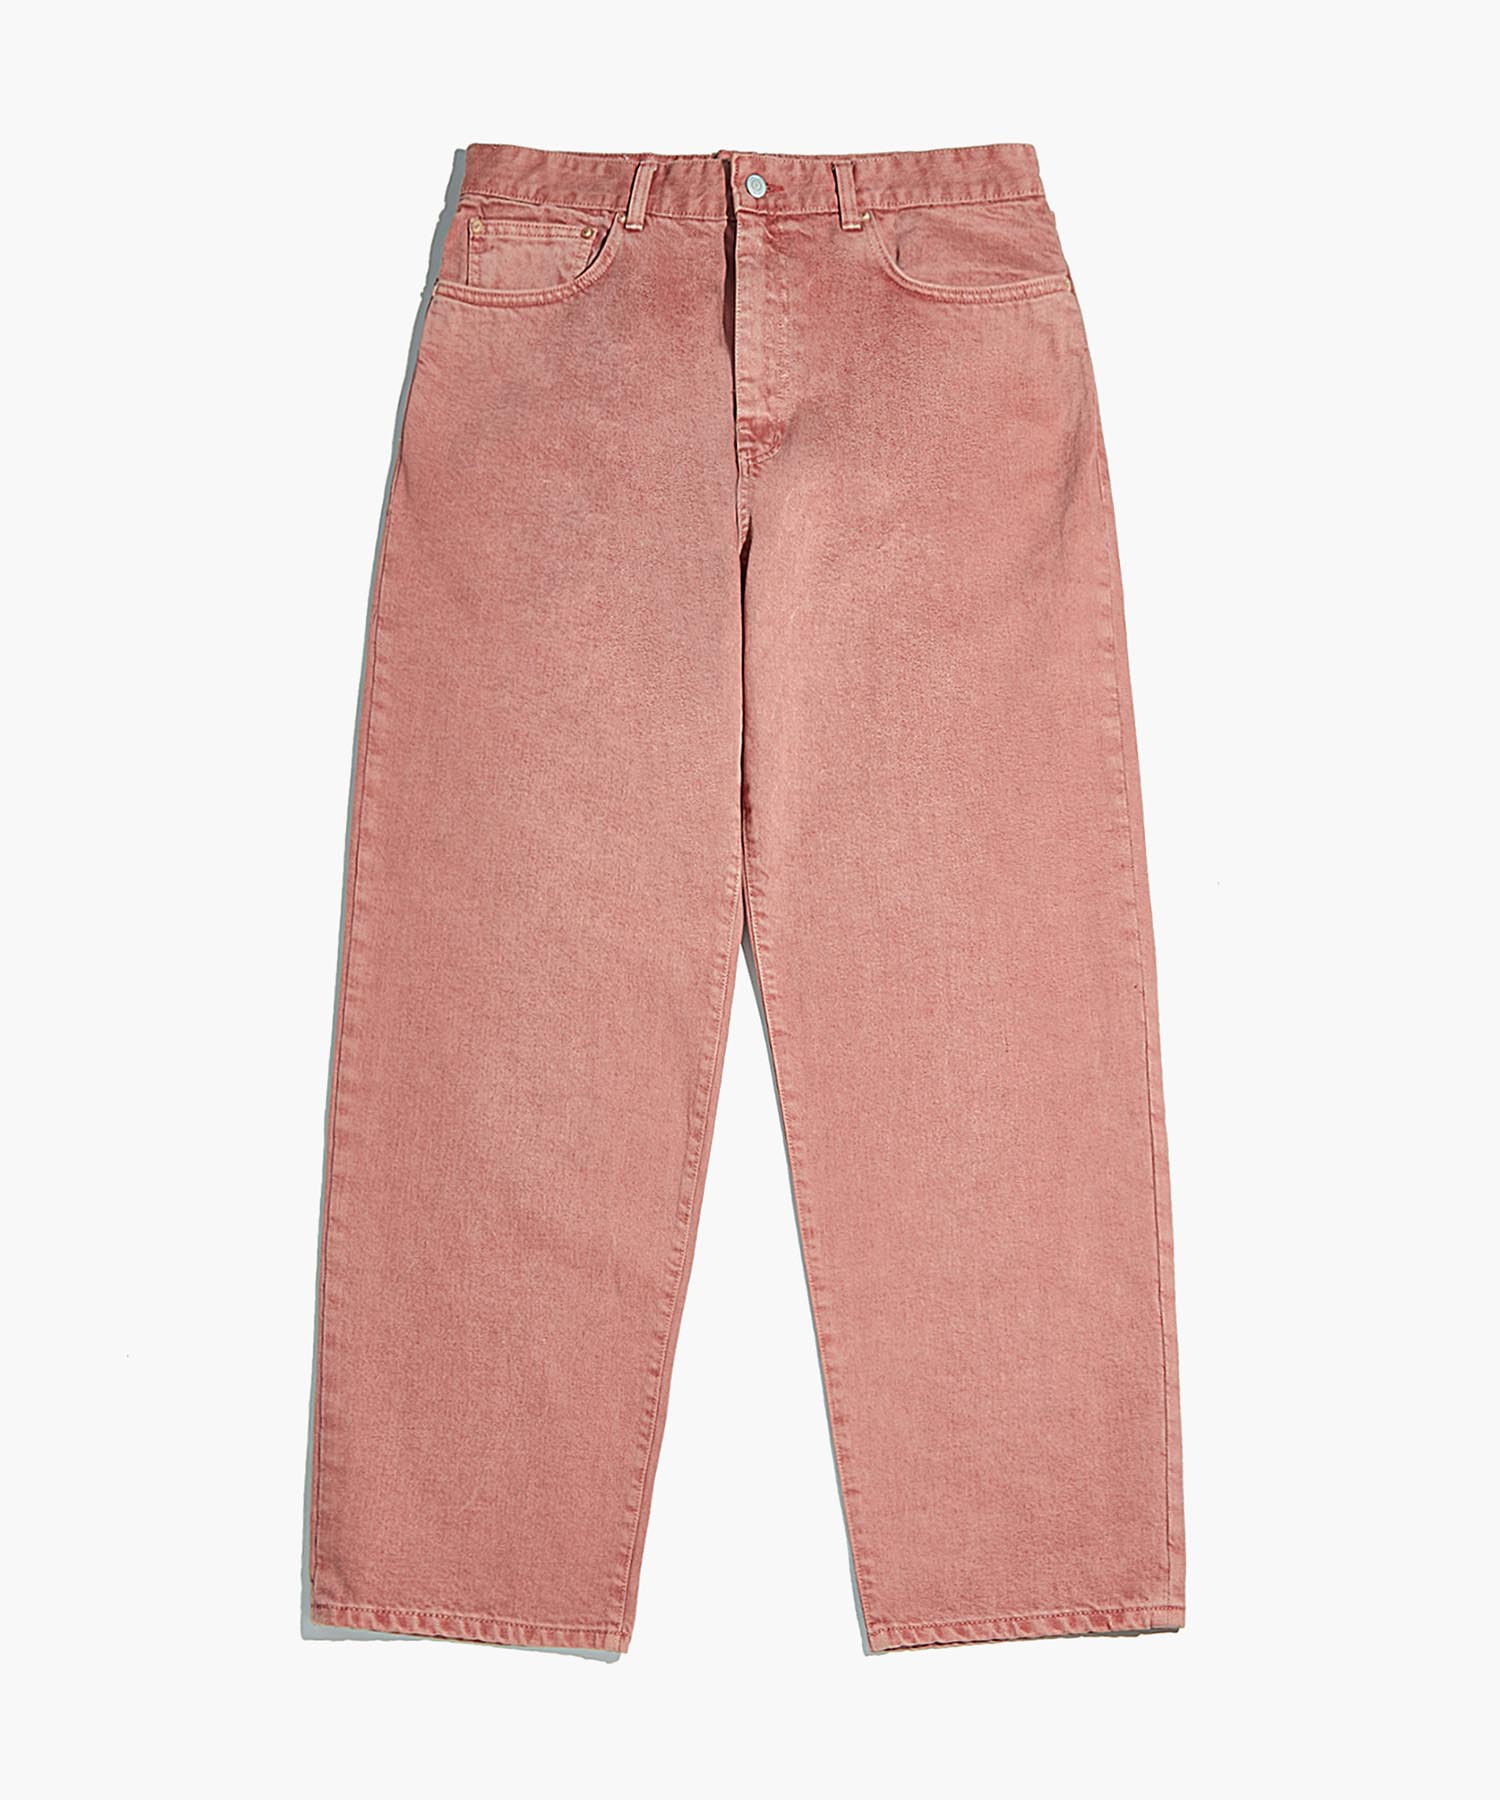 PIGMENT DYING TAPERED PANTS_PINK